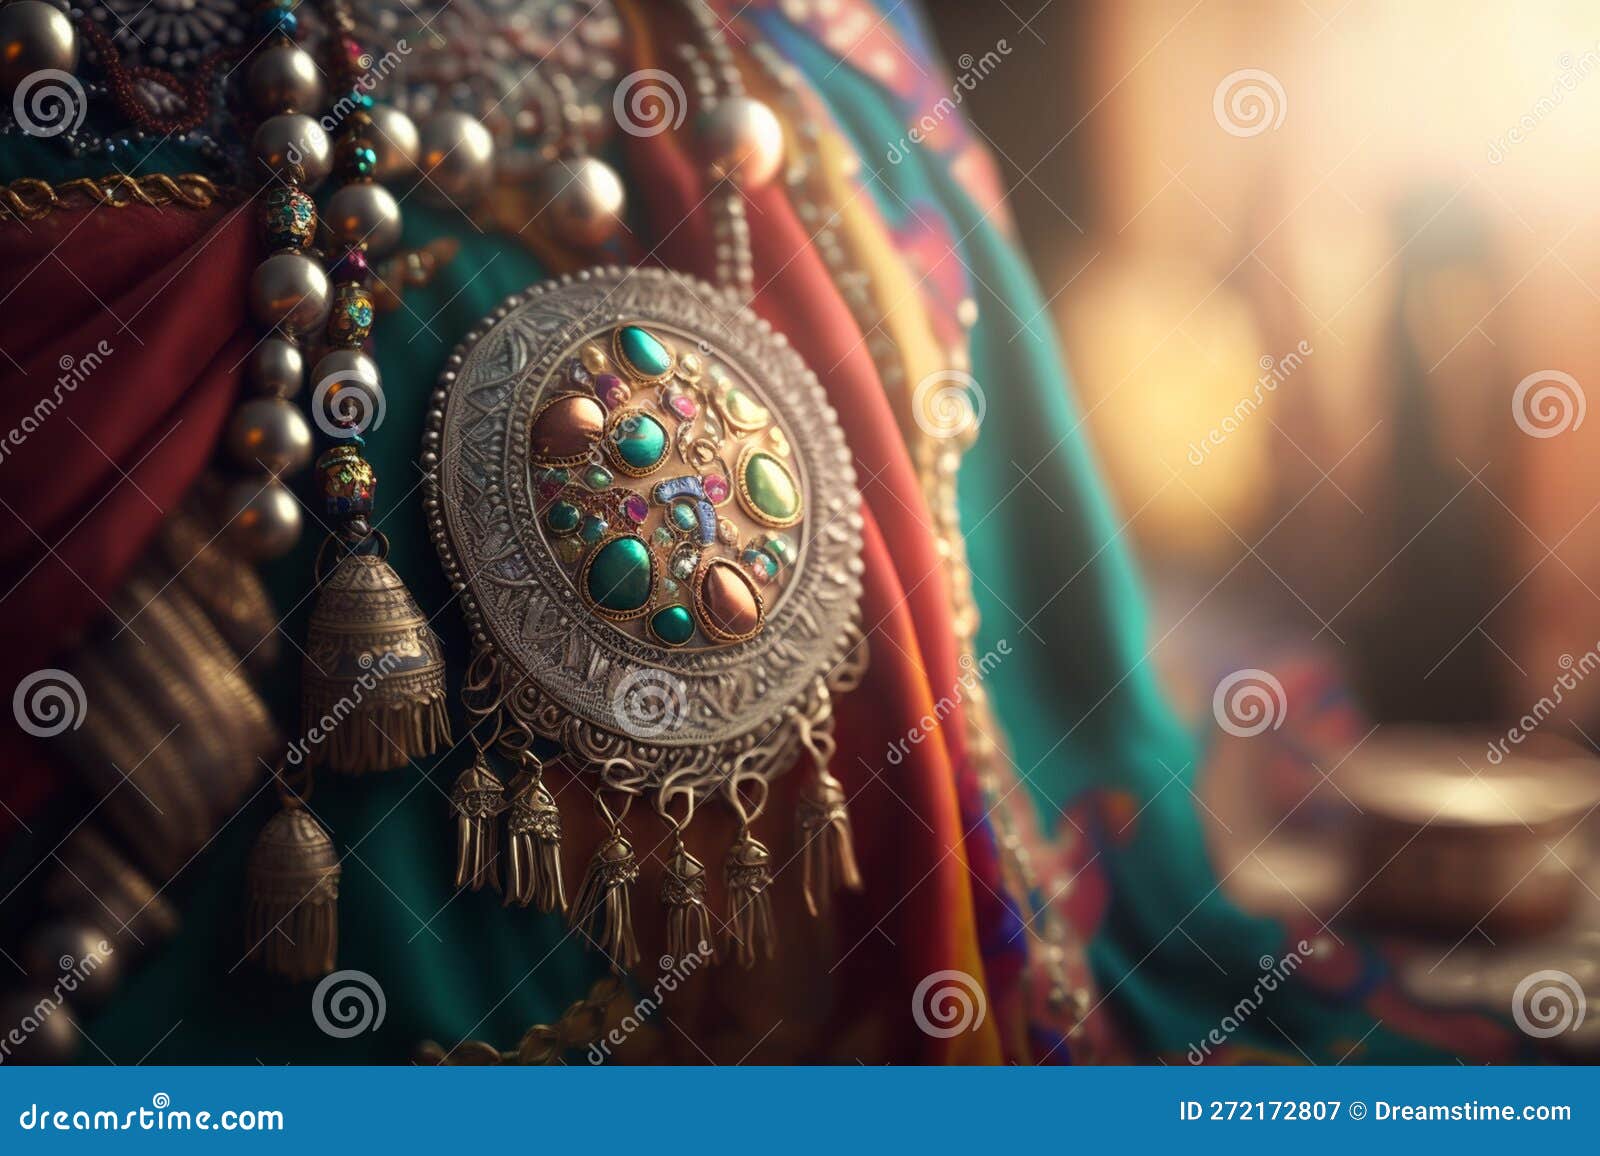 hippie - indian jewelry - ethnic accessories for free-spirited fashionistas